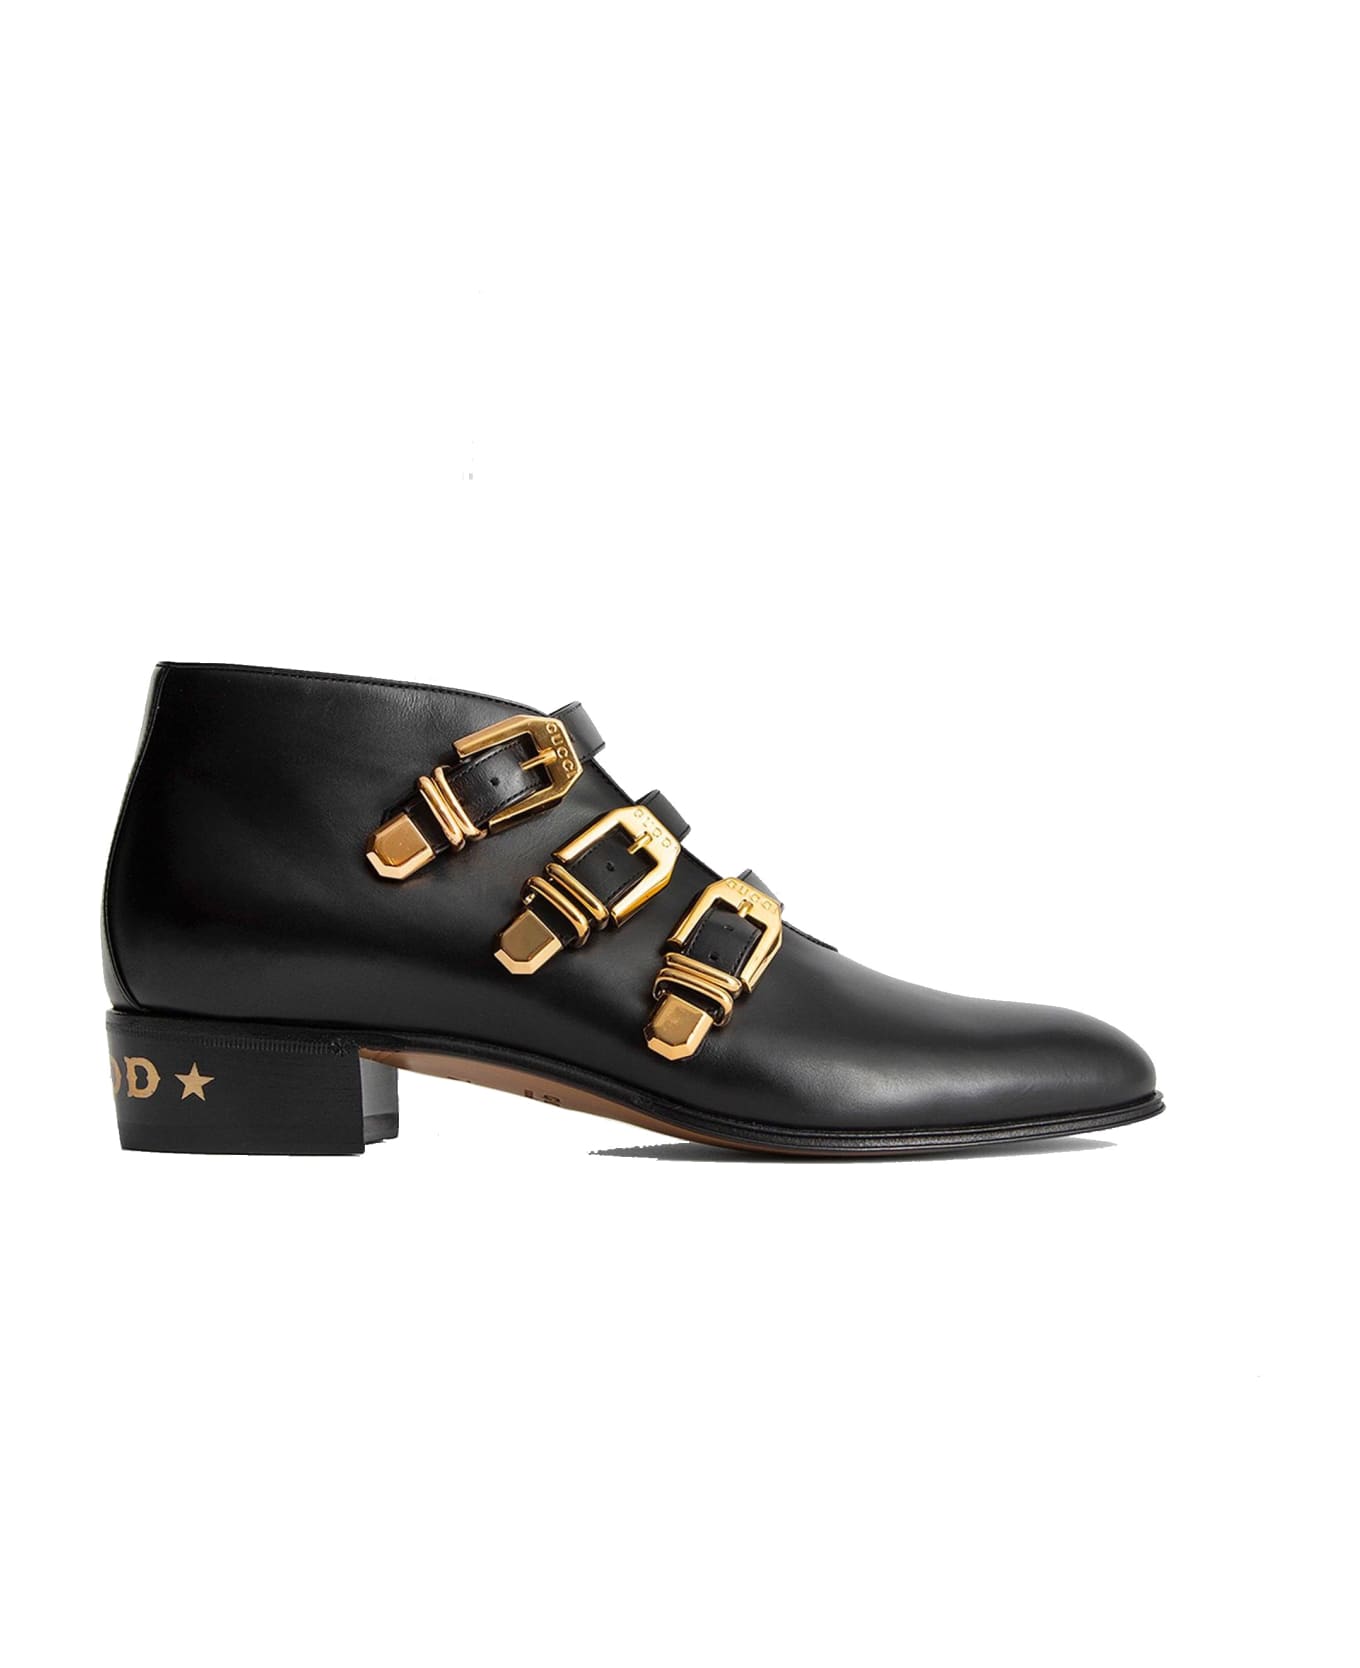 Gucci Leather Ankle Boots - Black